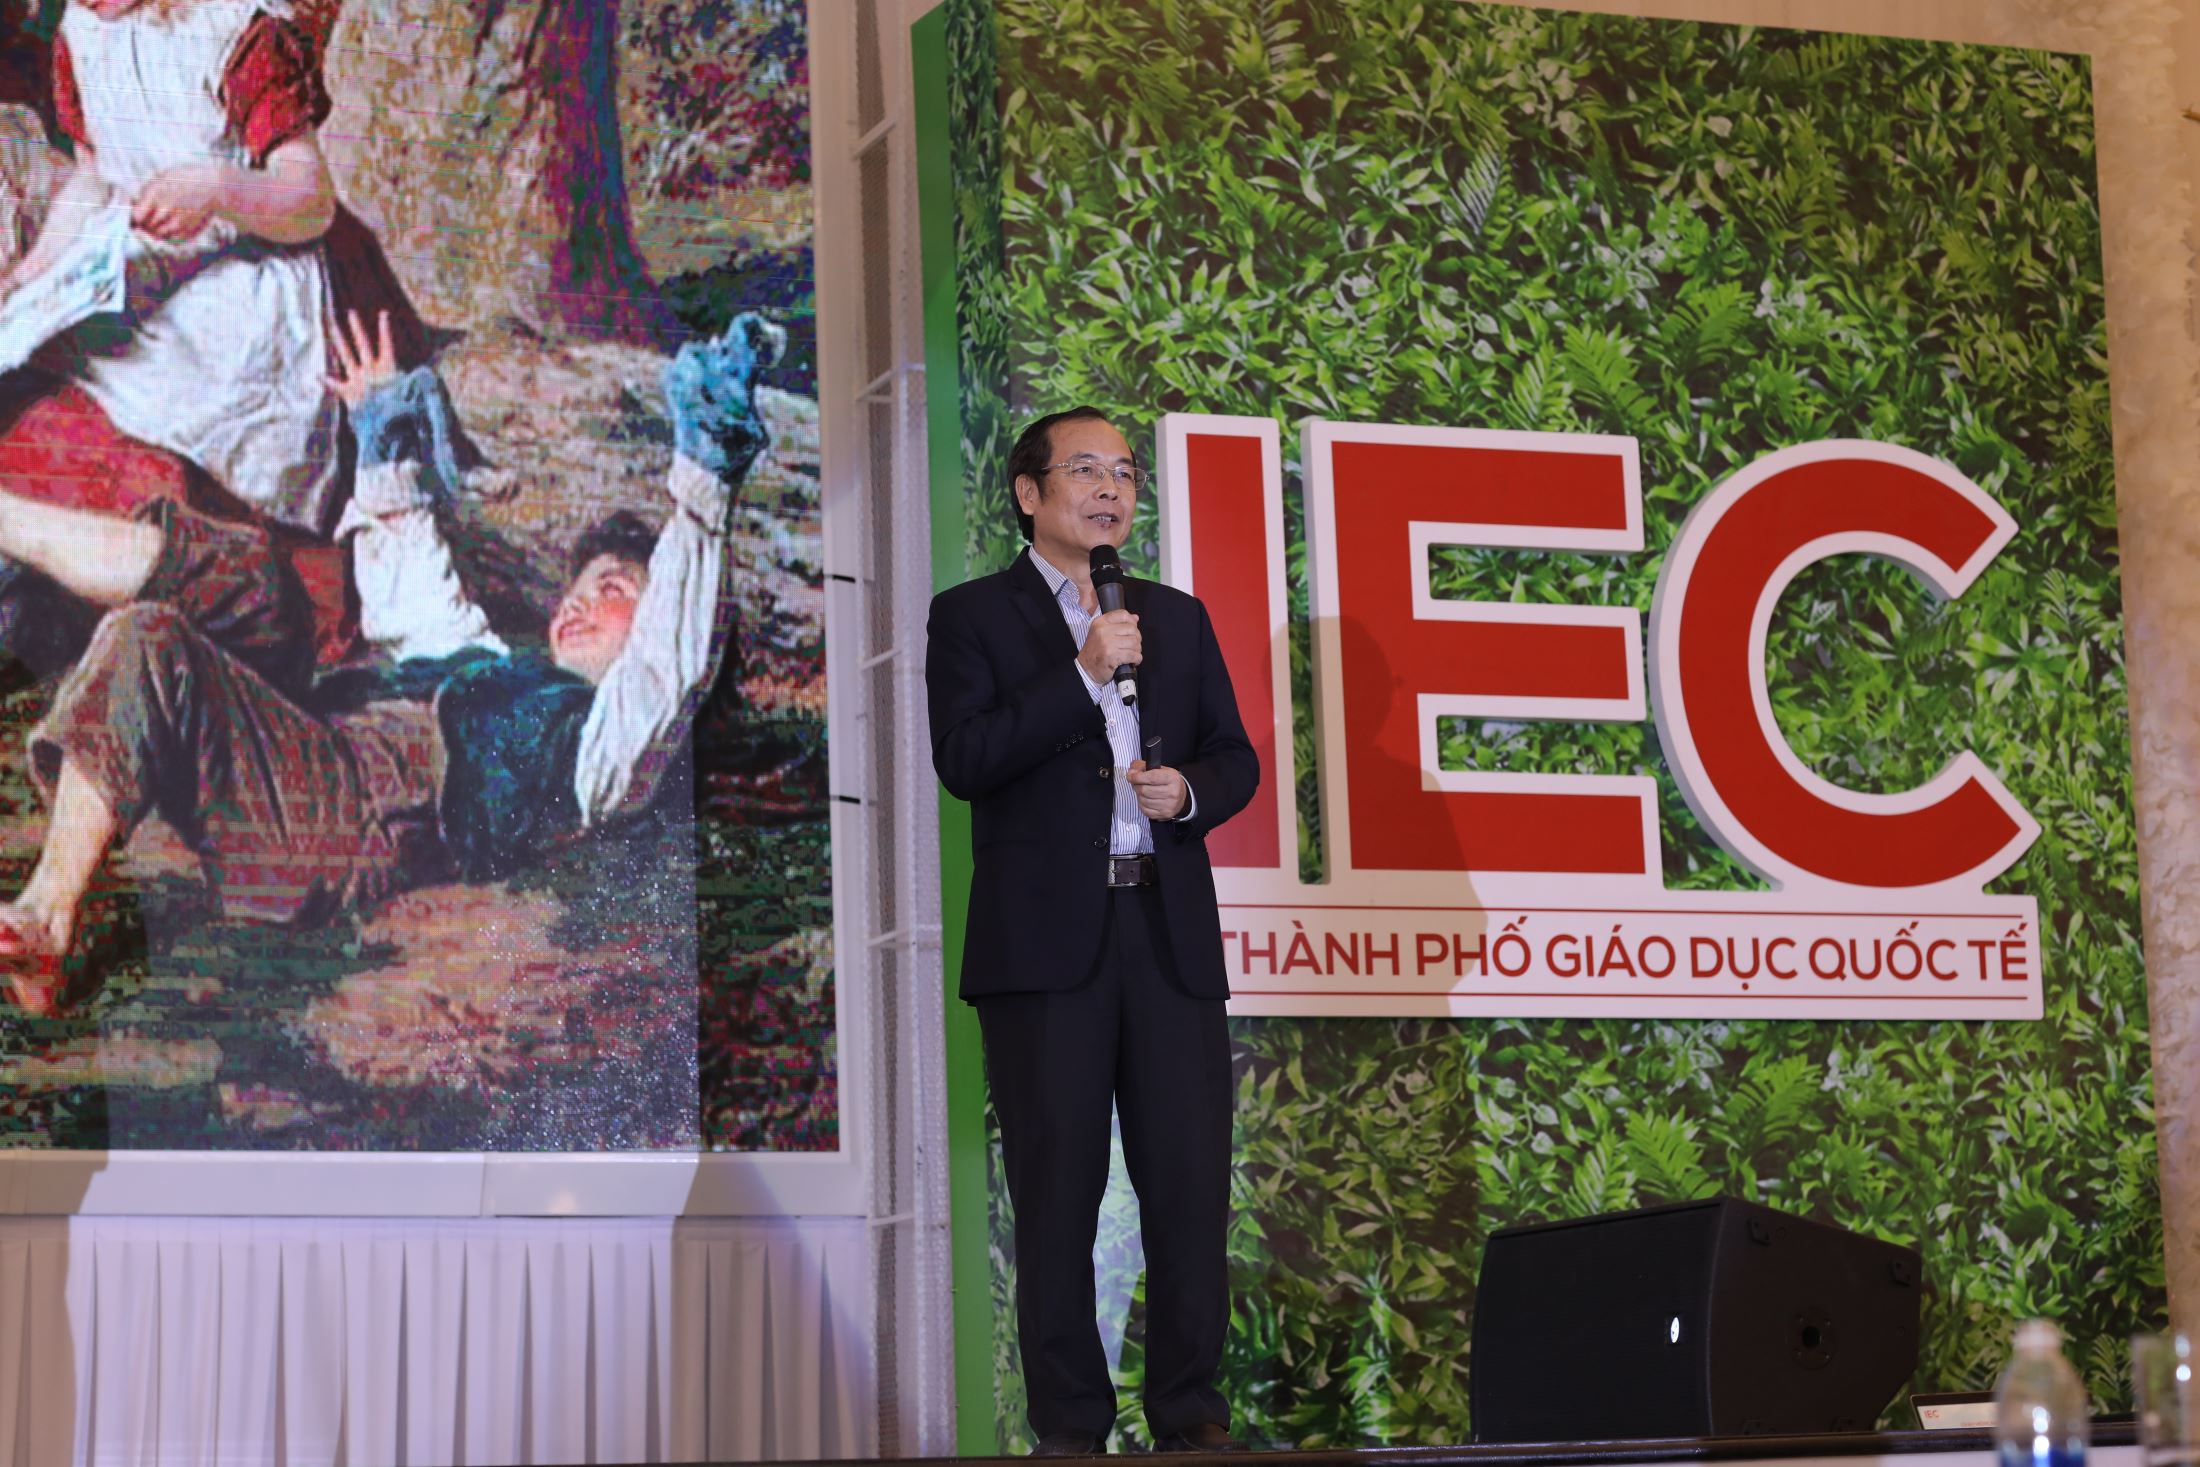 Dr. Do Manh Cuong – Permanent member of NHG education council presenting about the comprehensive education ecosystem model